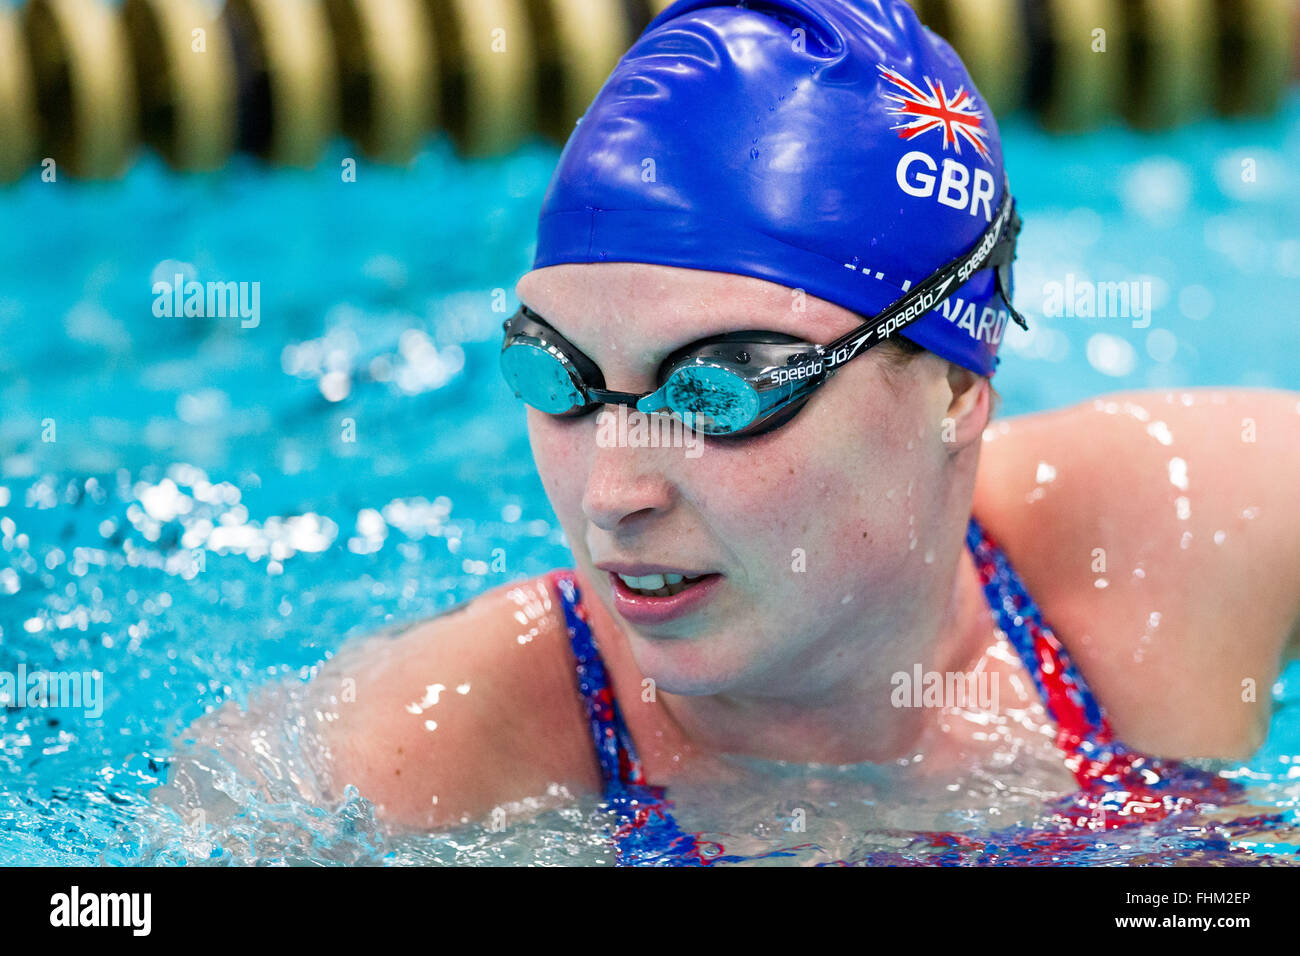 British Paralympic swimmer Steph Millward trains at the National Performance Centre in Manchester on December, 16, 2015. Stock Photo